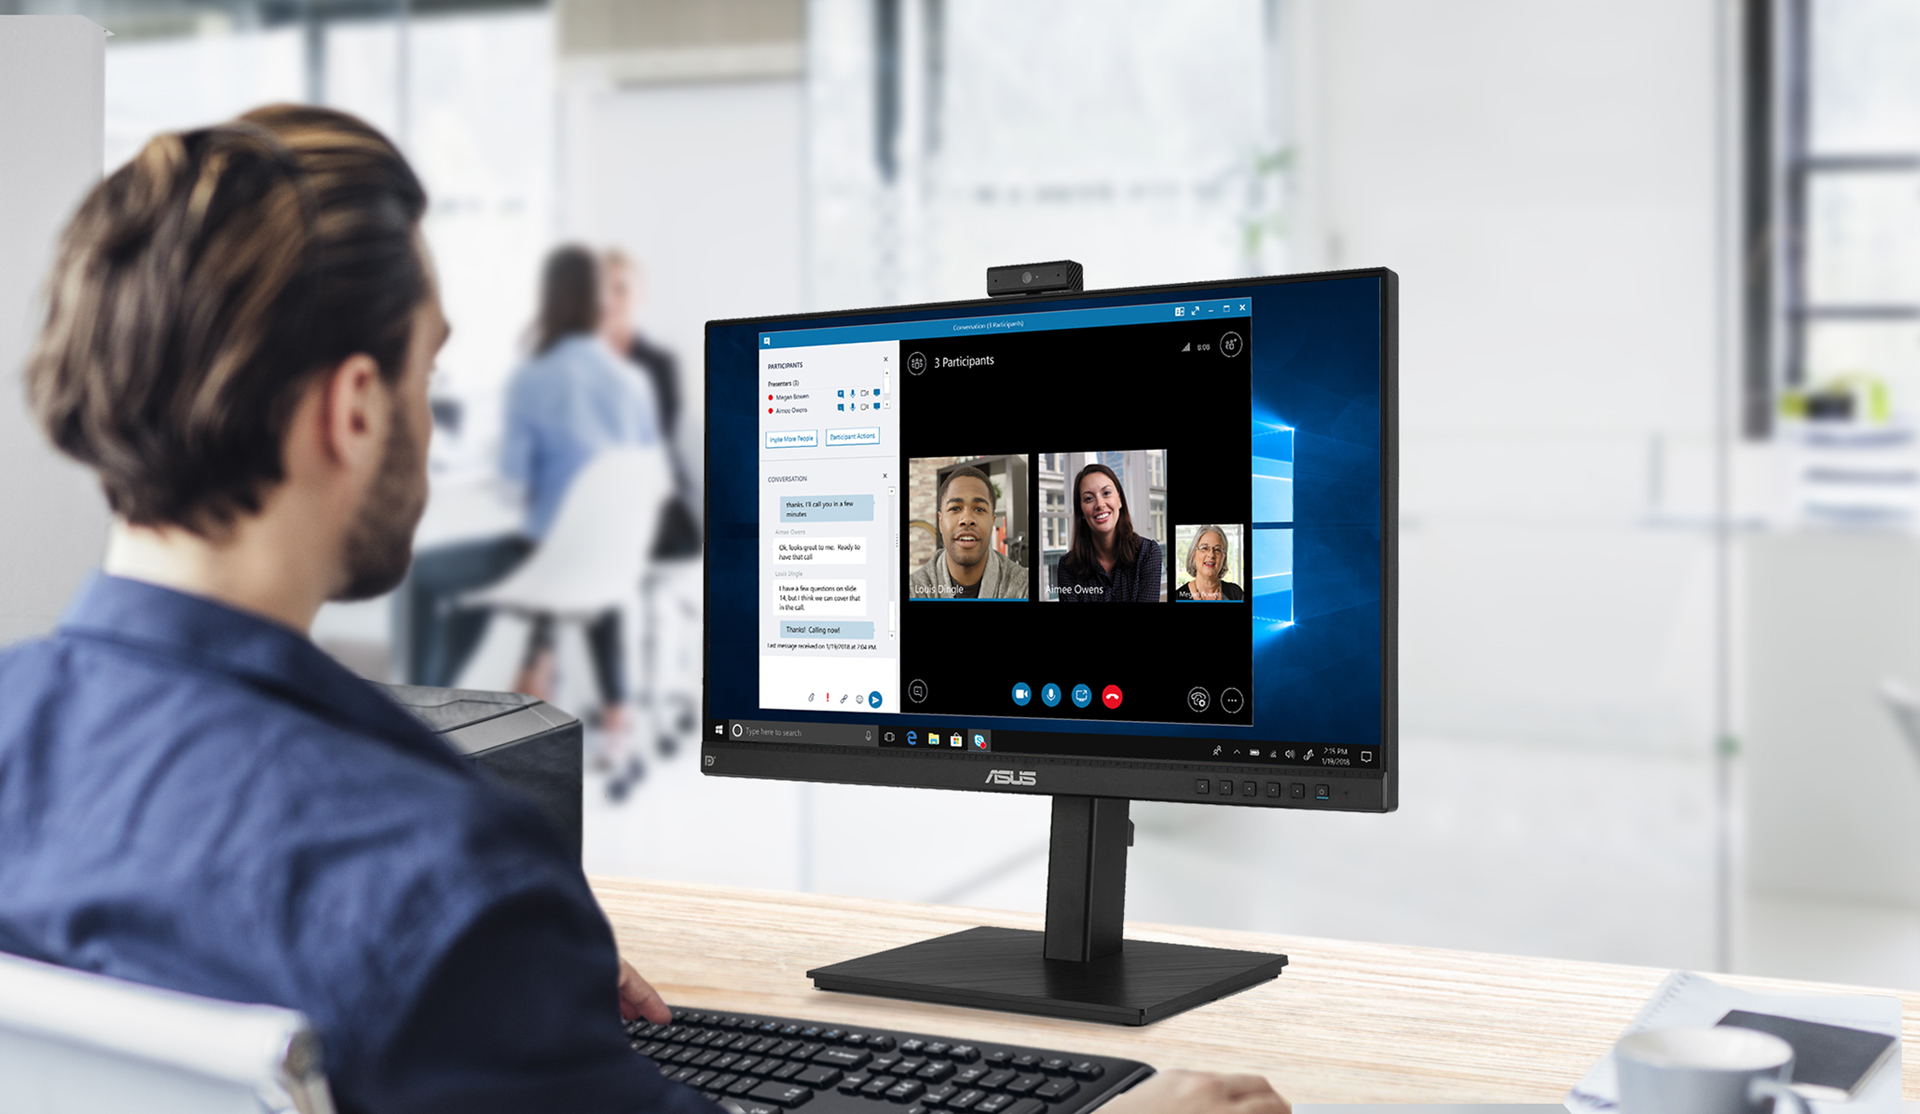 BE24EQSK is a 23.8-inch Full HD monitor that features an integrated Full HD (2MP) webcam, microphone array and stereo speakers for video conferencing and live-streaming.